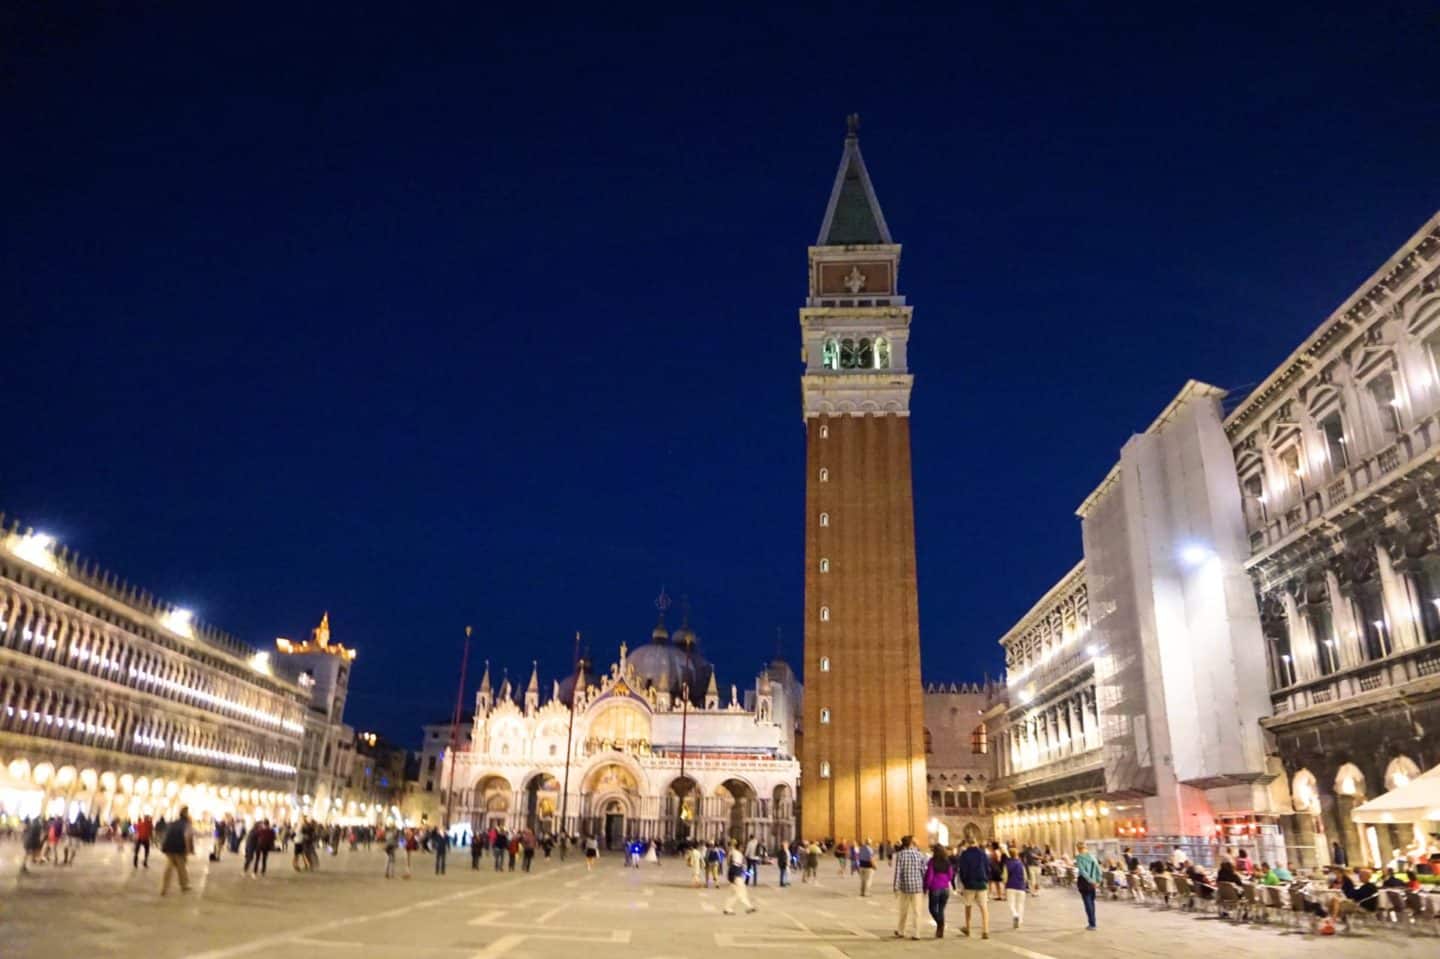 How to Avoid Crowds in Venice